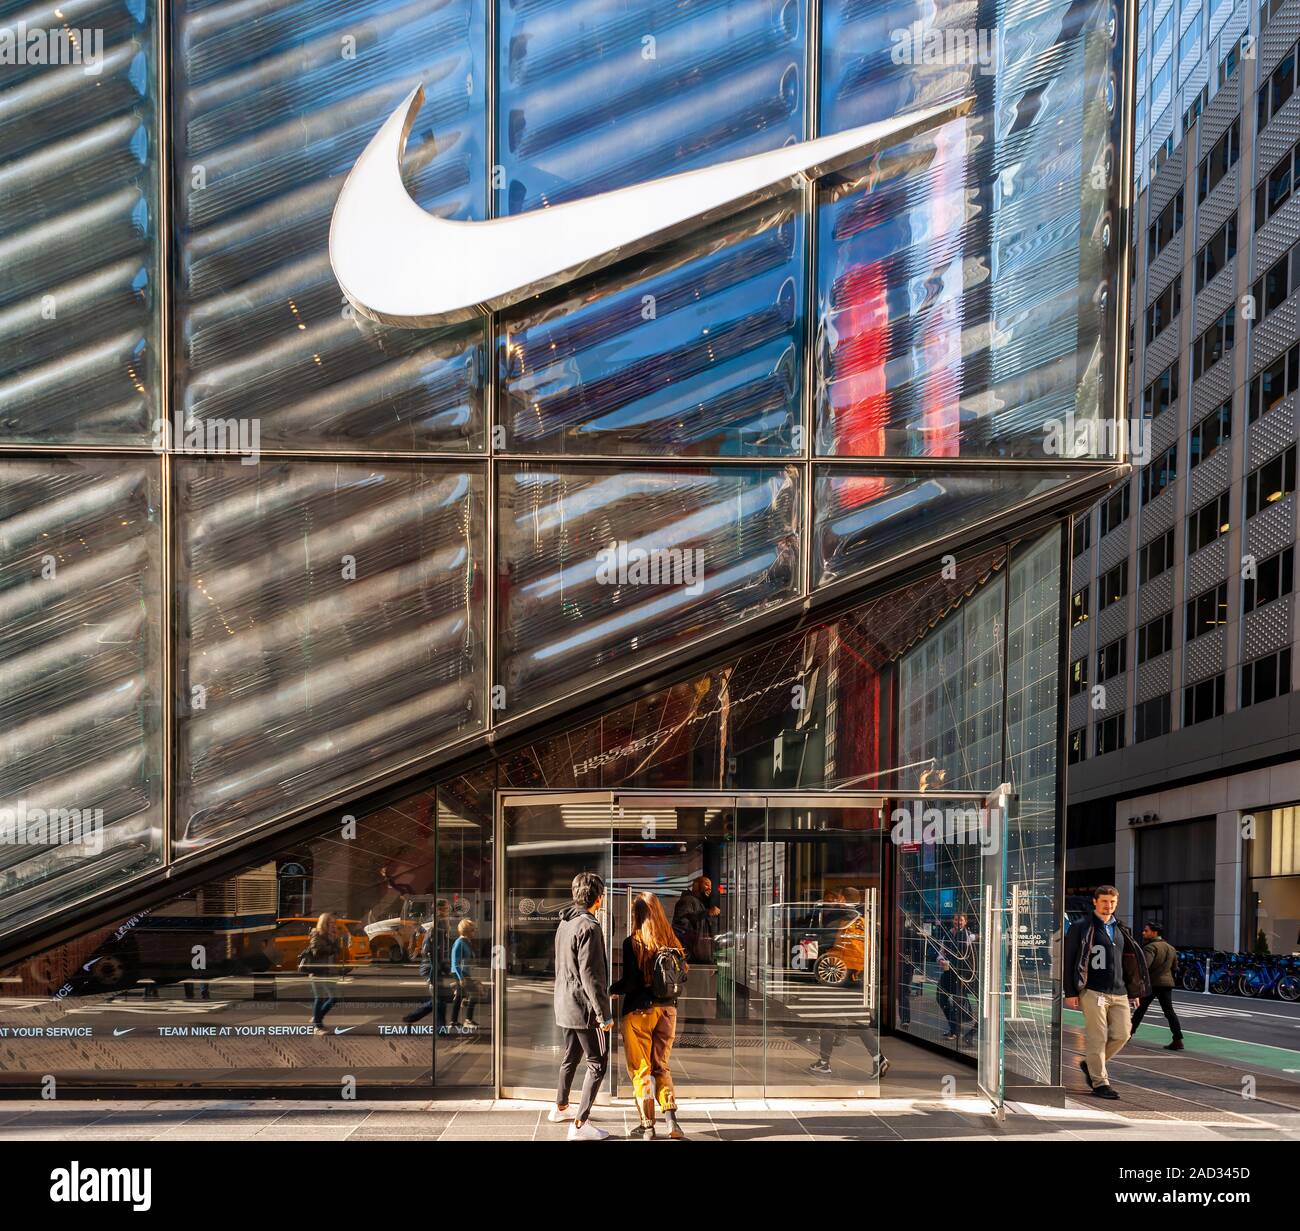 niketown 5th ave nyc